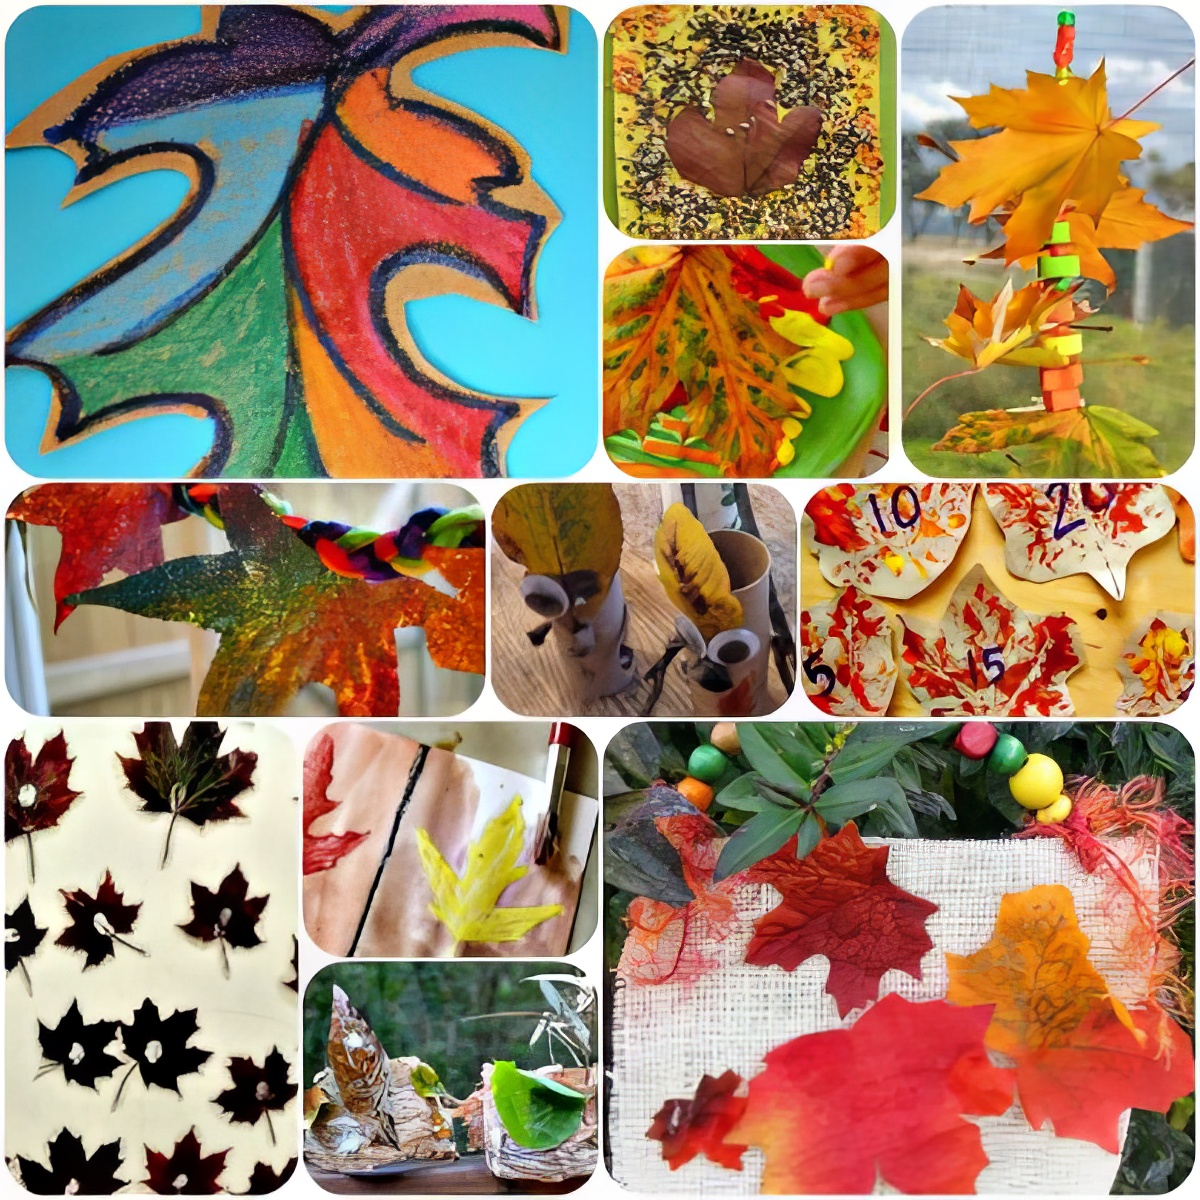 13-leafy-crafts-and-activities-for-kids, creative leaf crafts for kids